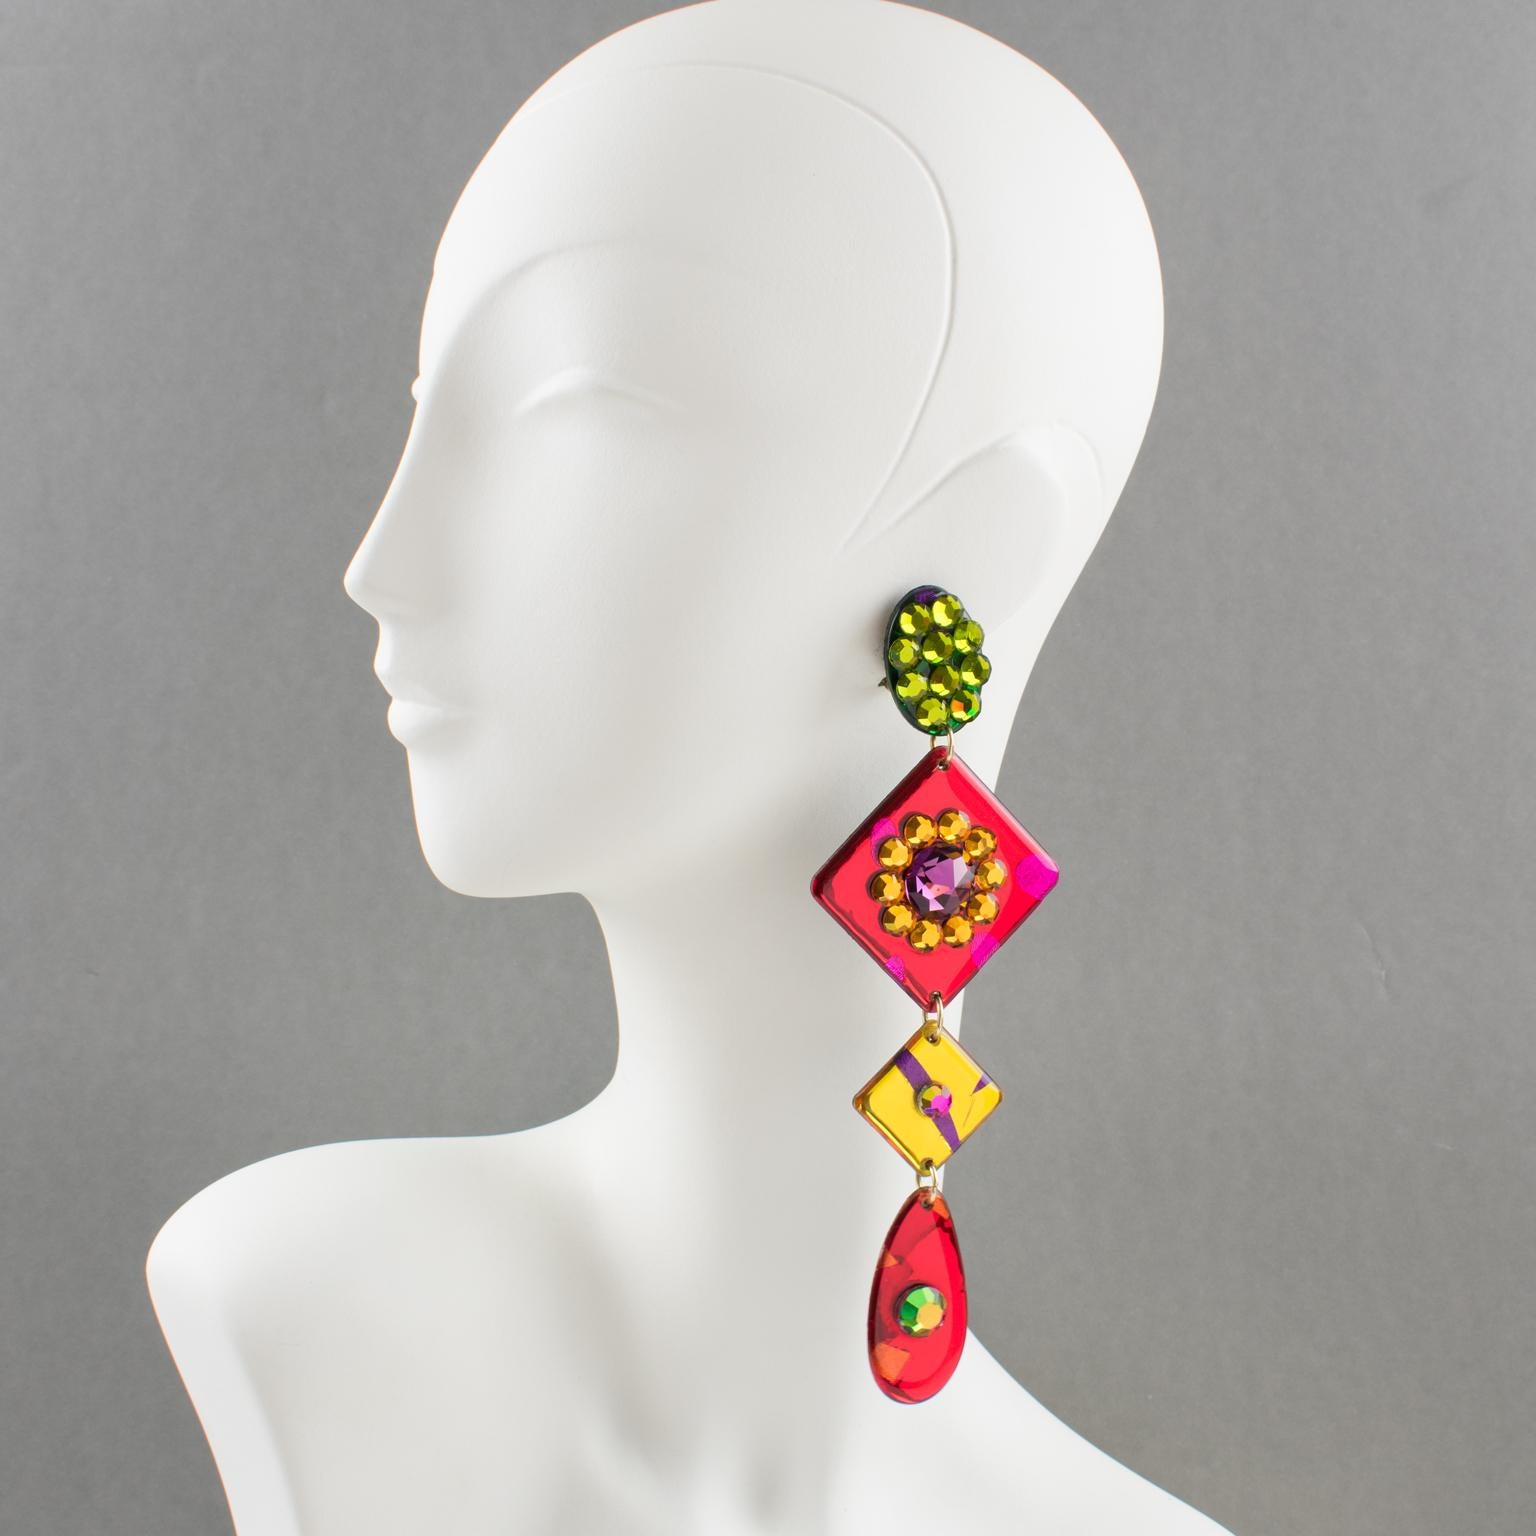 Do you think you have seen extra long-shoulder duster earrings... well... check out these !!!
Spectacular Italian designer studio Lucite or Resin dangling clip-on earrings. Oversized shoulder-duster design with geometric shape (drop, ovoid, large,